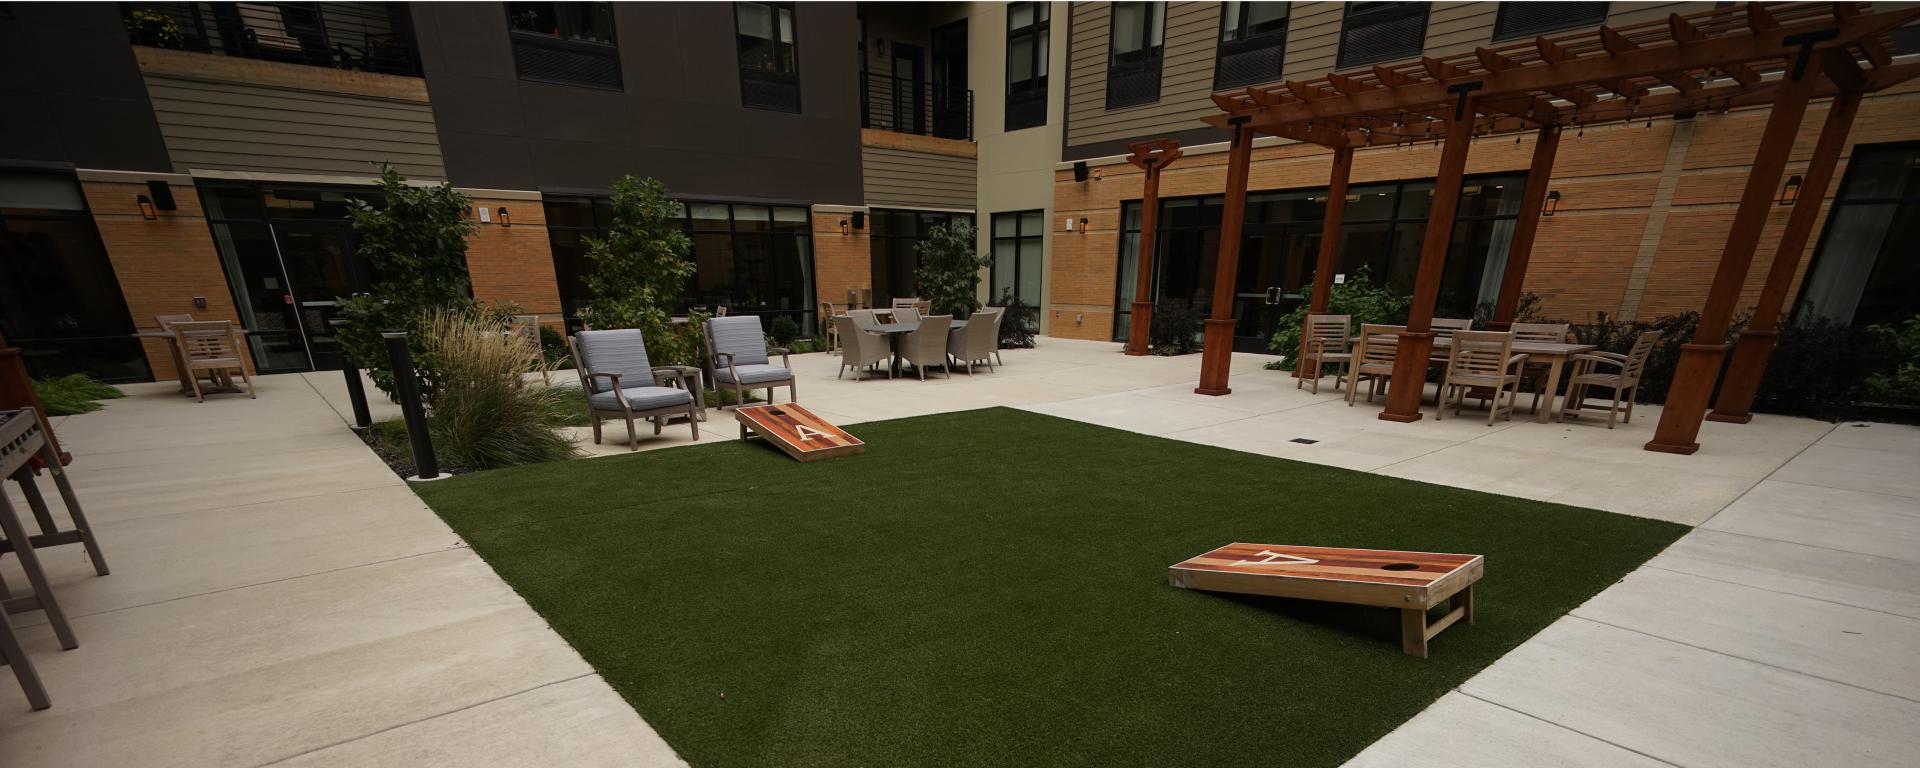 courtyard with cornhole boards on green grass